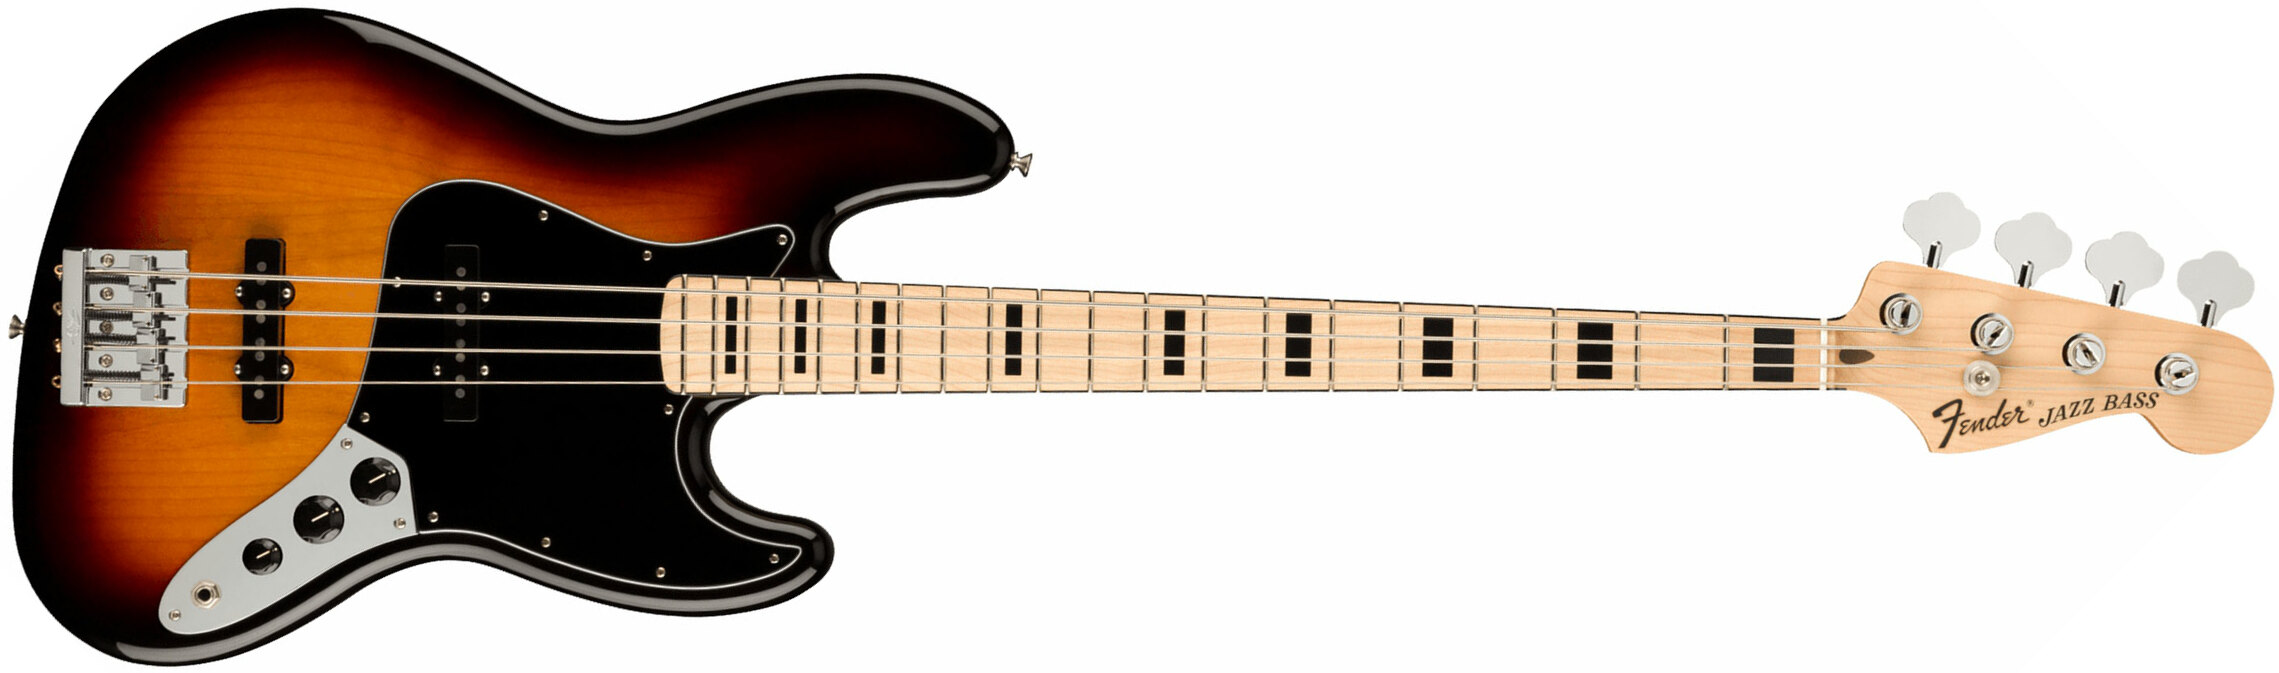 Fender Geddy Lee Jazz Bass Signature Mex Mn - 3-color Sunburst - Solid body electric bass - Main picture